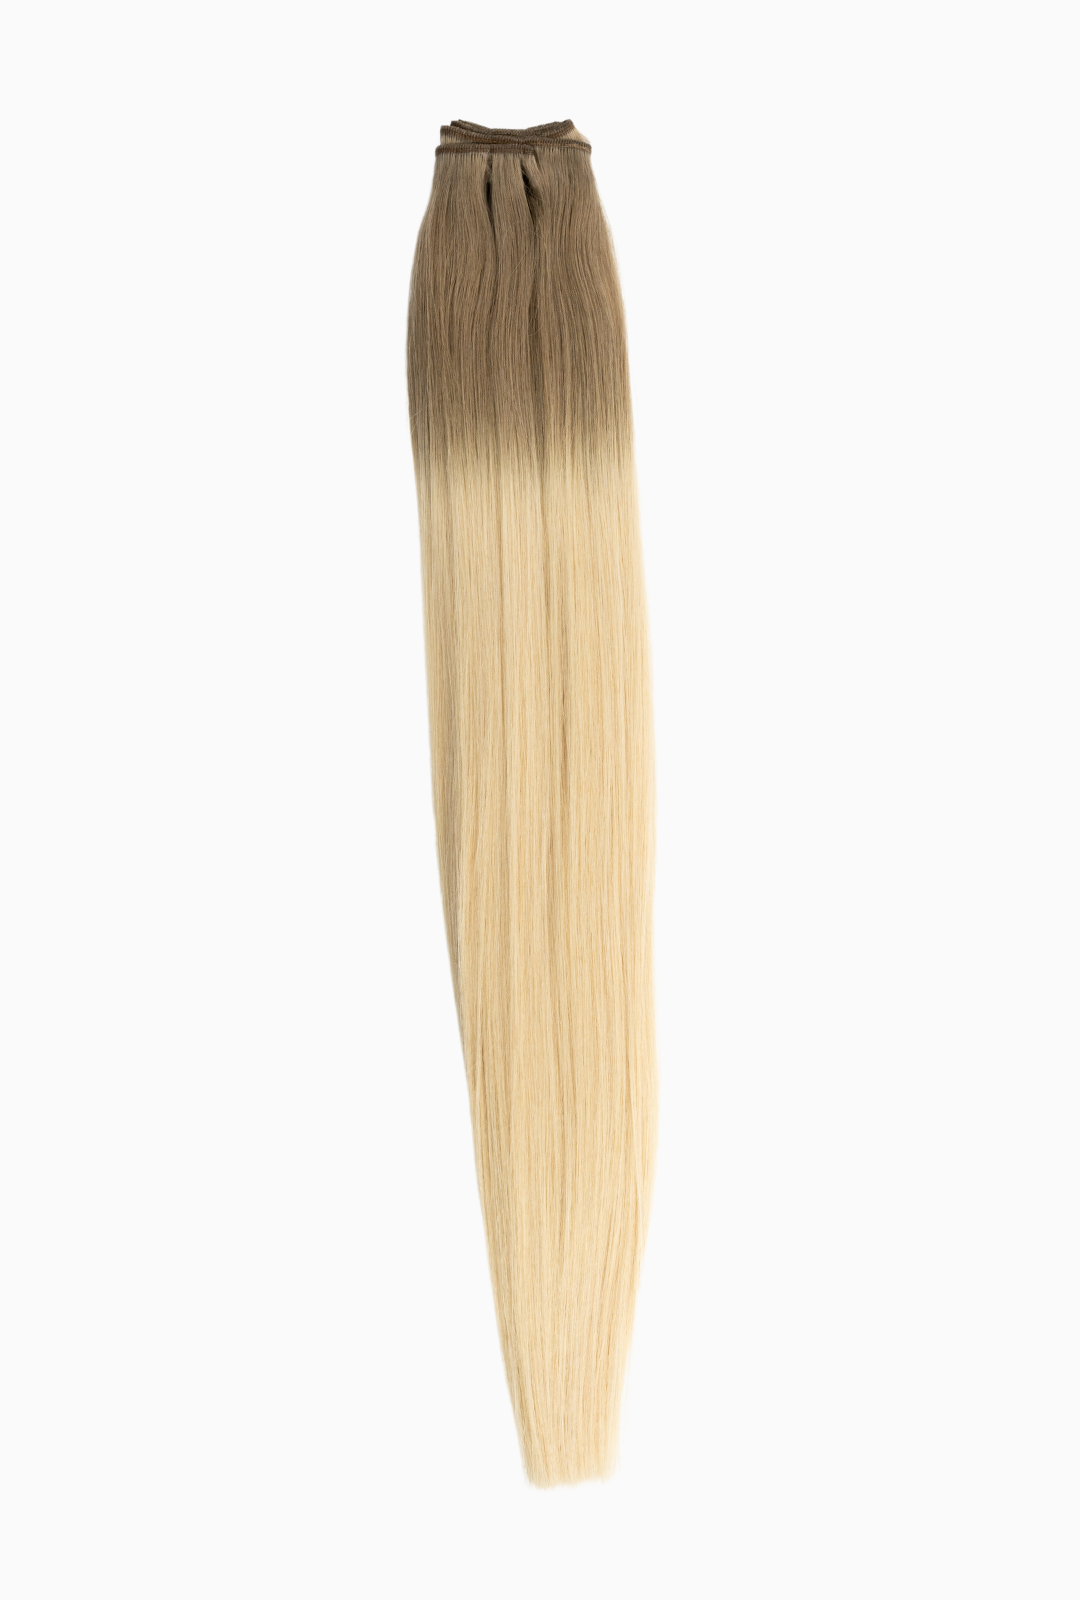 Laced Hair Machine Sewn Weft Extensions Ombré #8/613